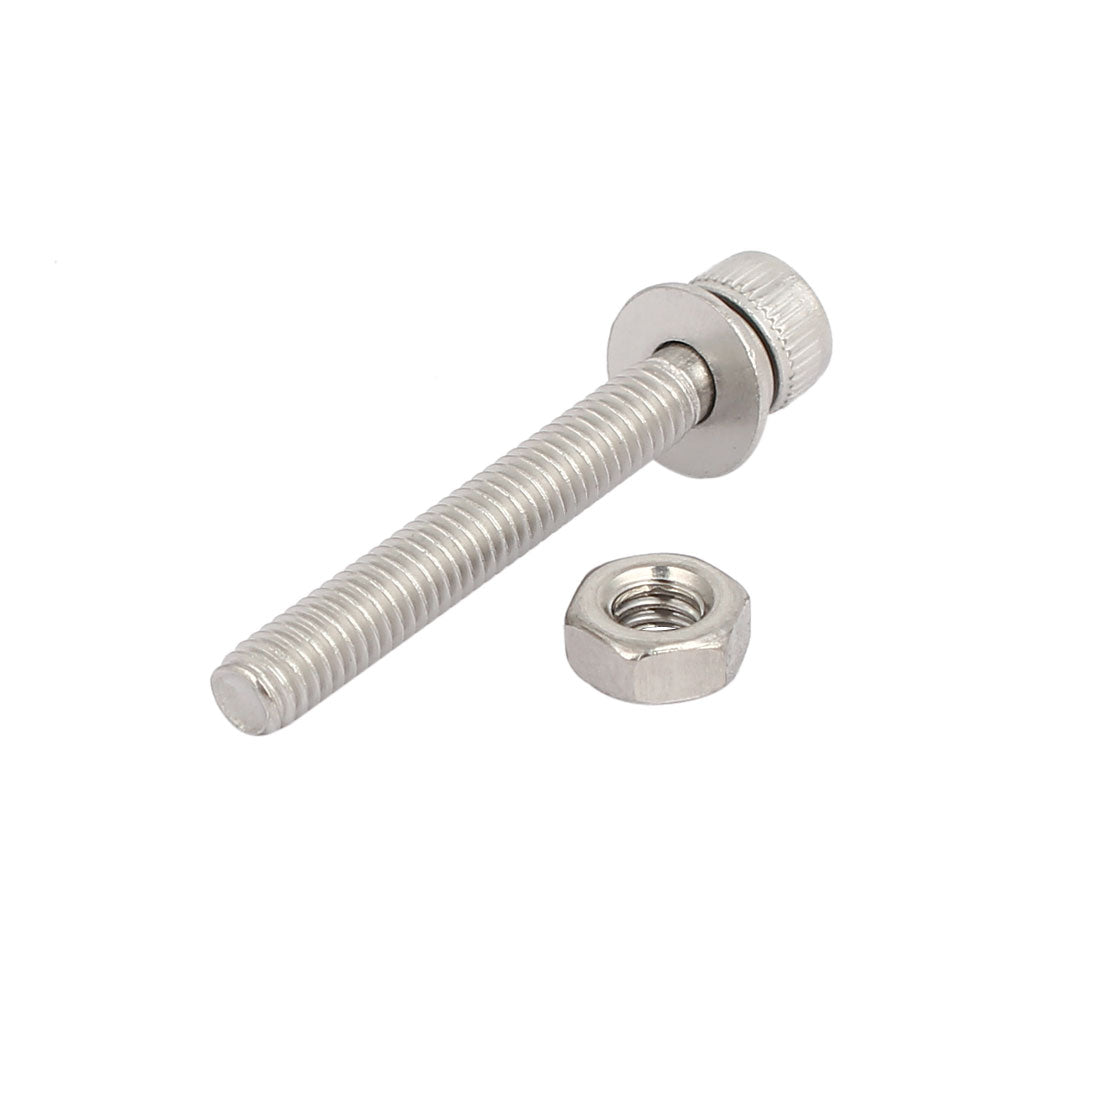 uxcell Uxcell M4x30mm 304 Stainless Steel Hex Socket Head Cap Bolt Screw Nut w Washer 18 Sets